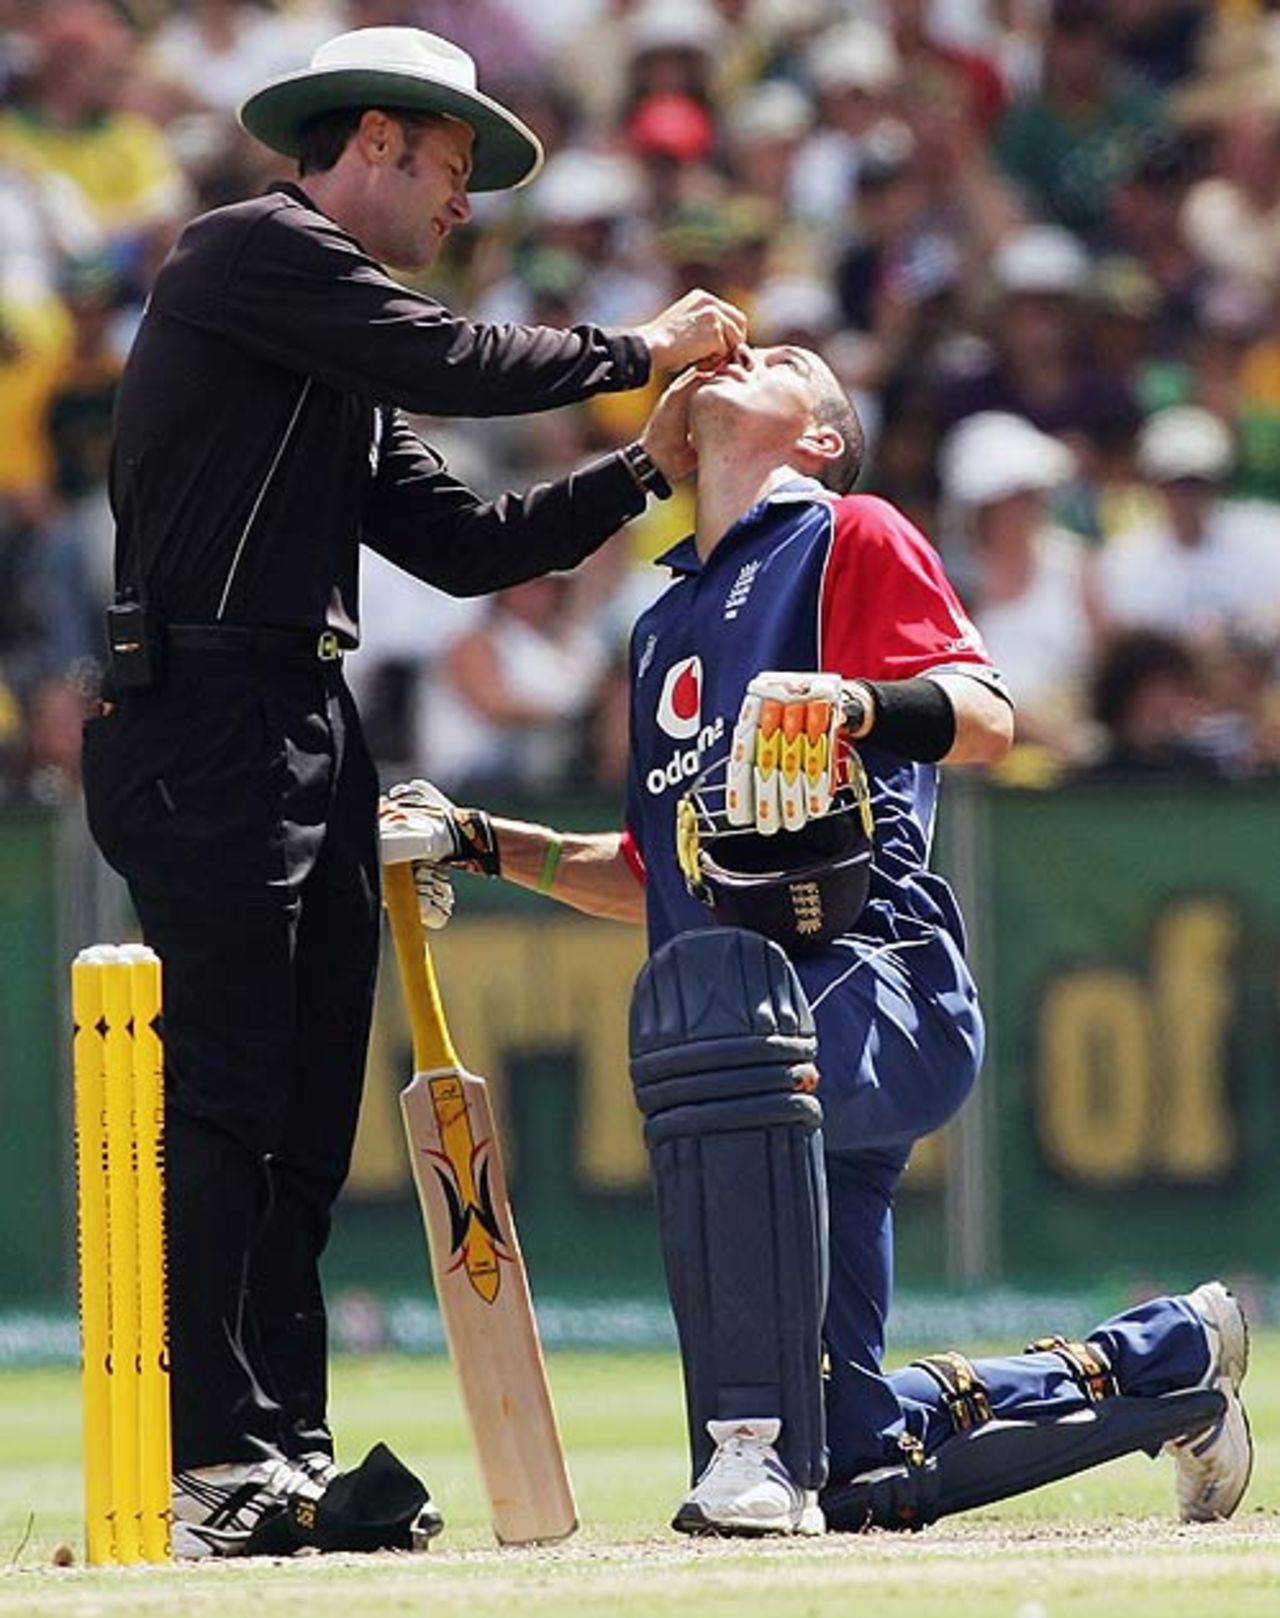 Simon Taufel removes something from Kevin Pietersen's eye, Australia v England, Commonwealth Bank Series, 1st Match, Melbourne, January 12, 2007